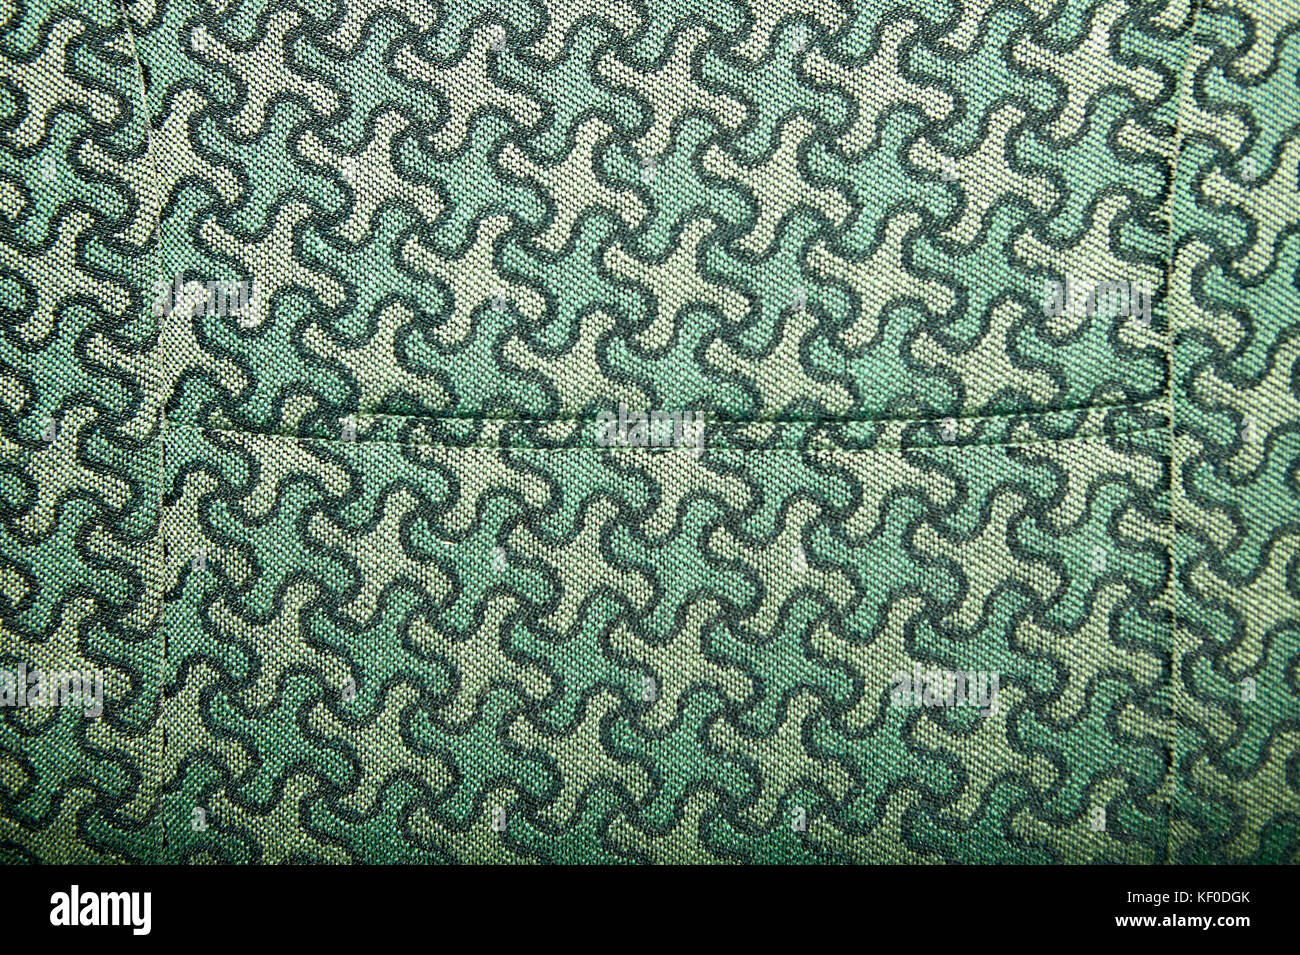 Close up view of a green and light green fabric pattern upholstery design on a large piece of furniture Stock Photo